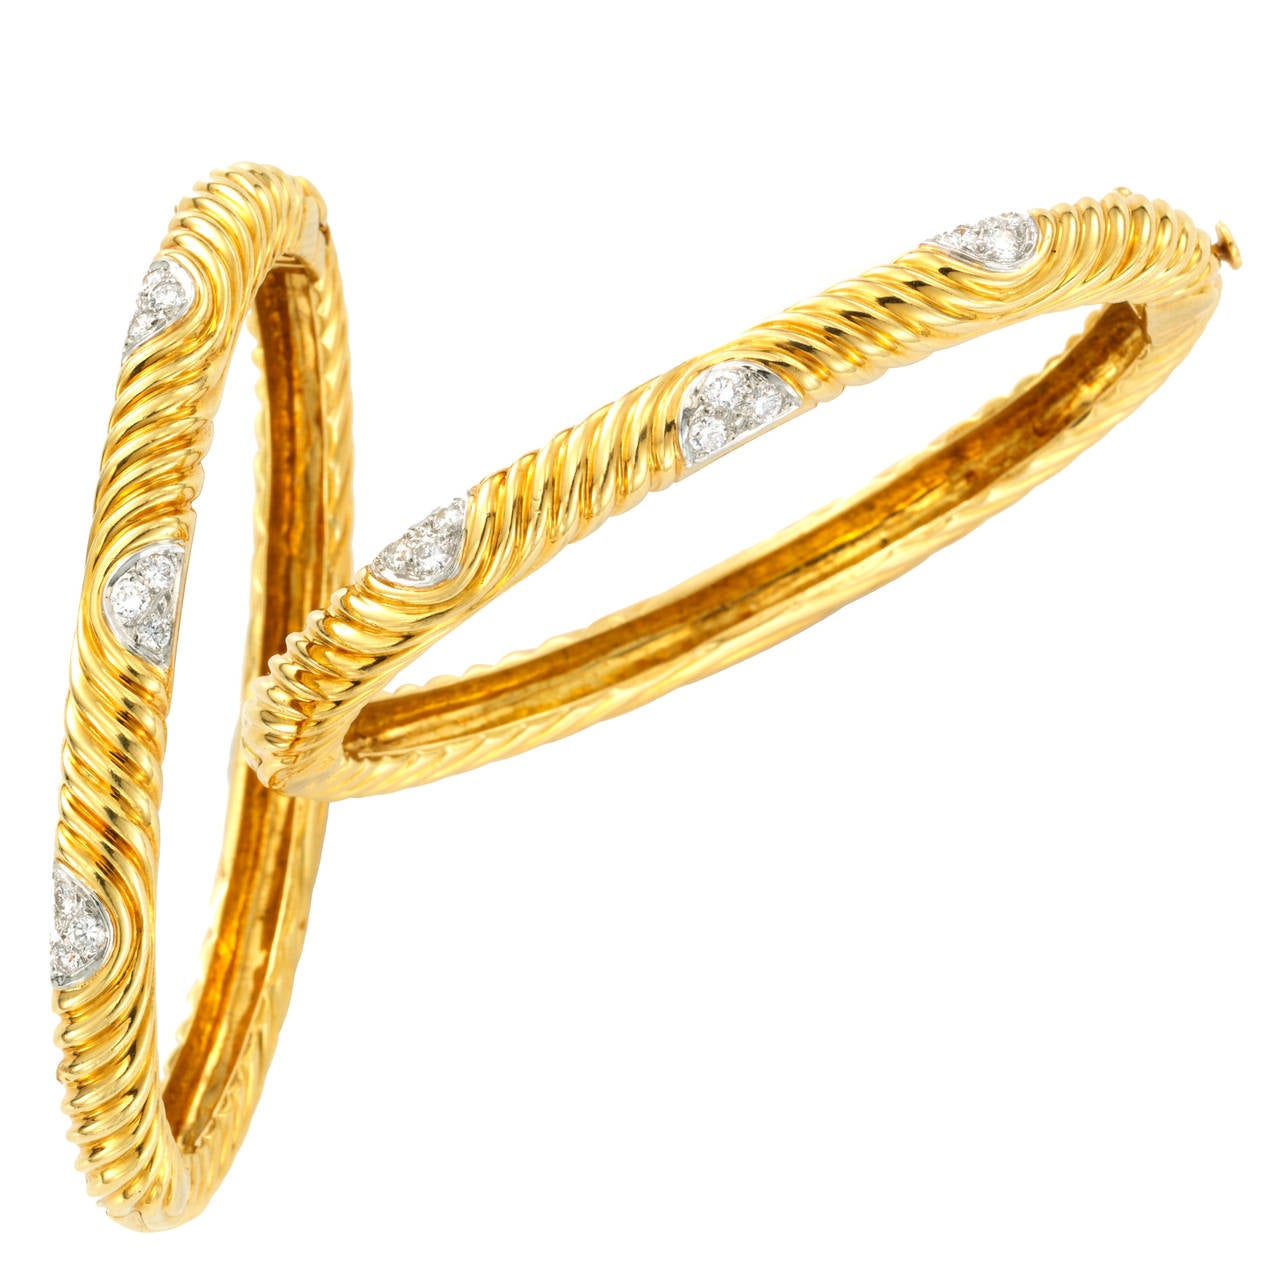 Van Cleef & Arpels Pair of Gold and Diamond Bangle Bracelets For Sale